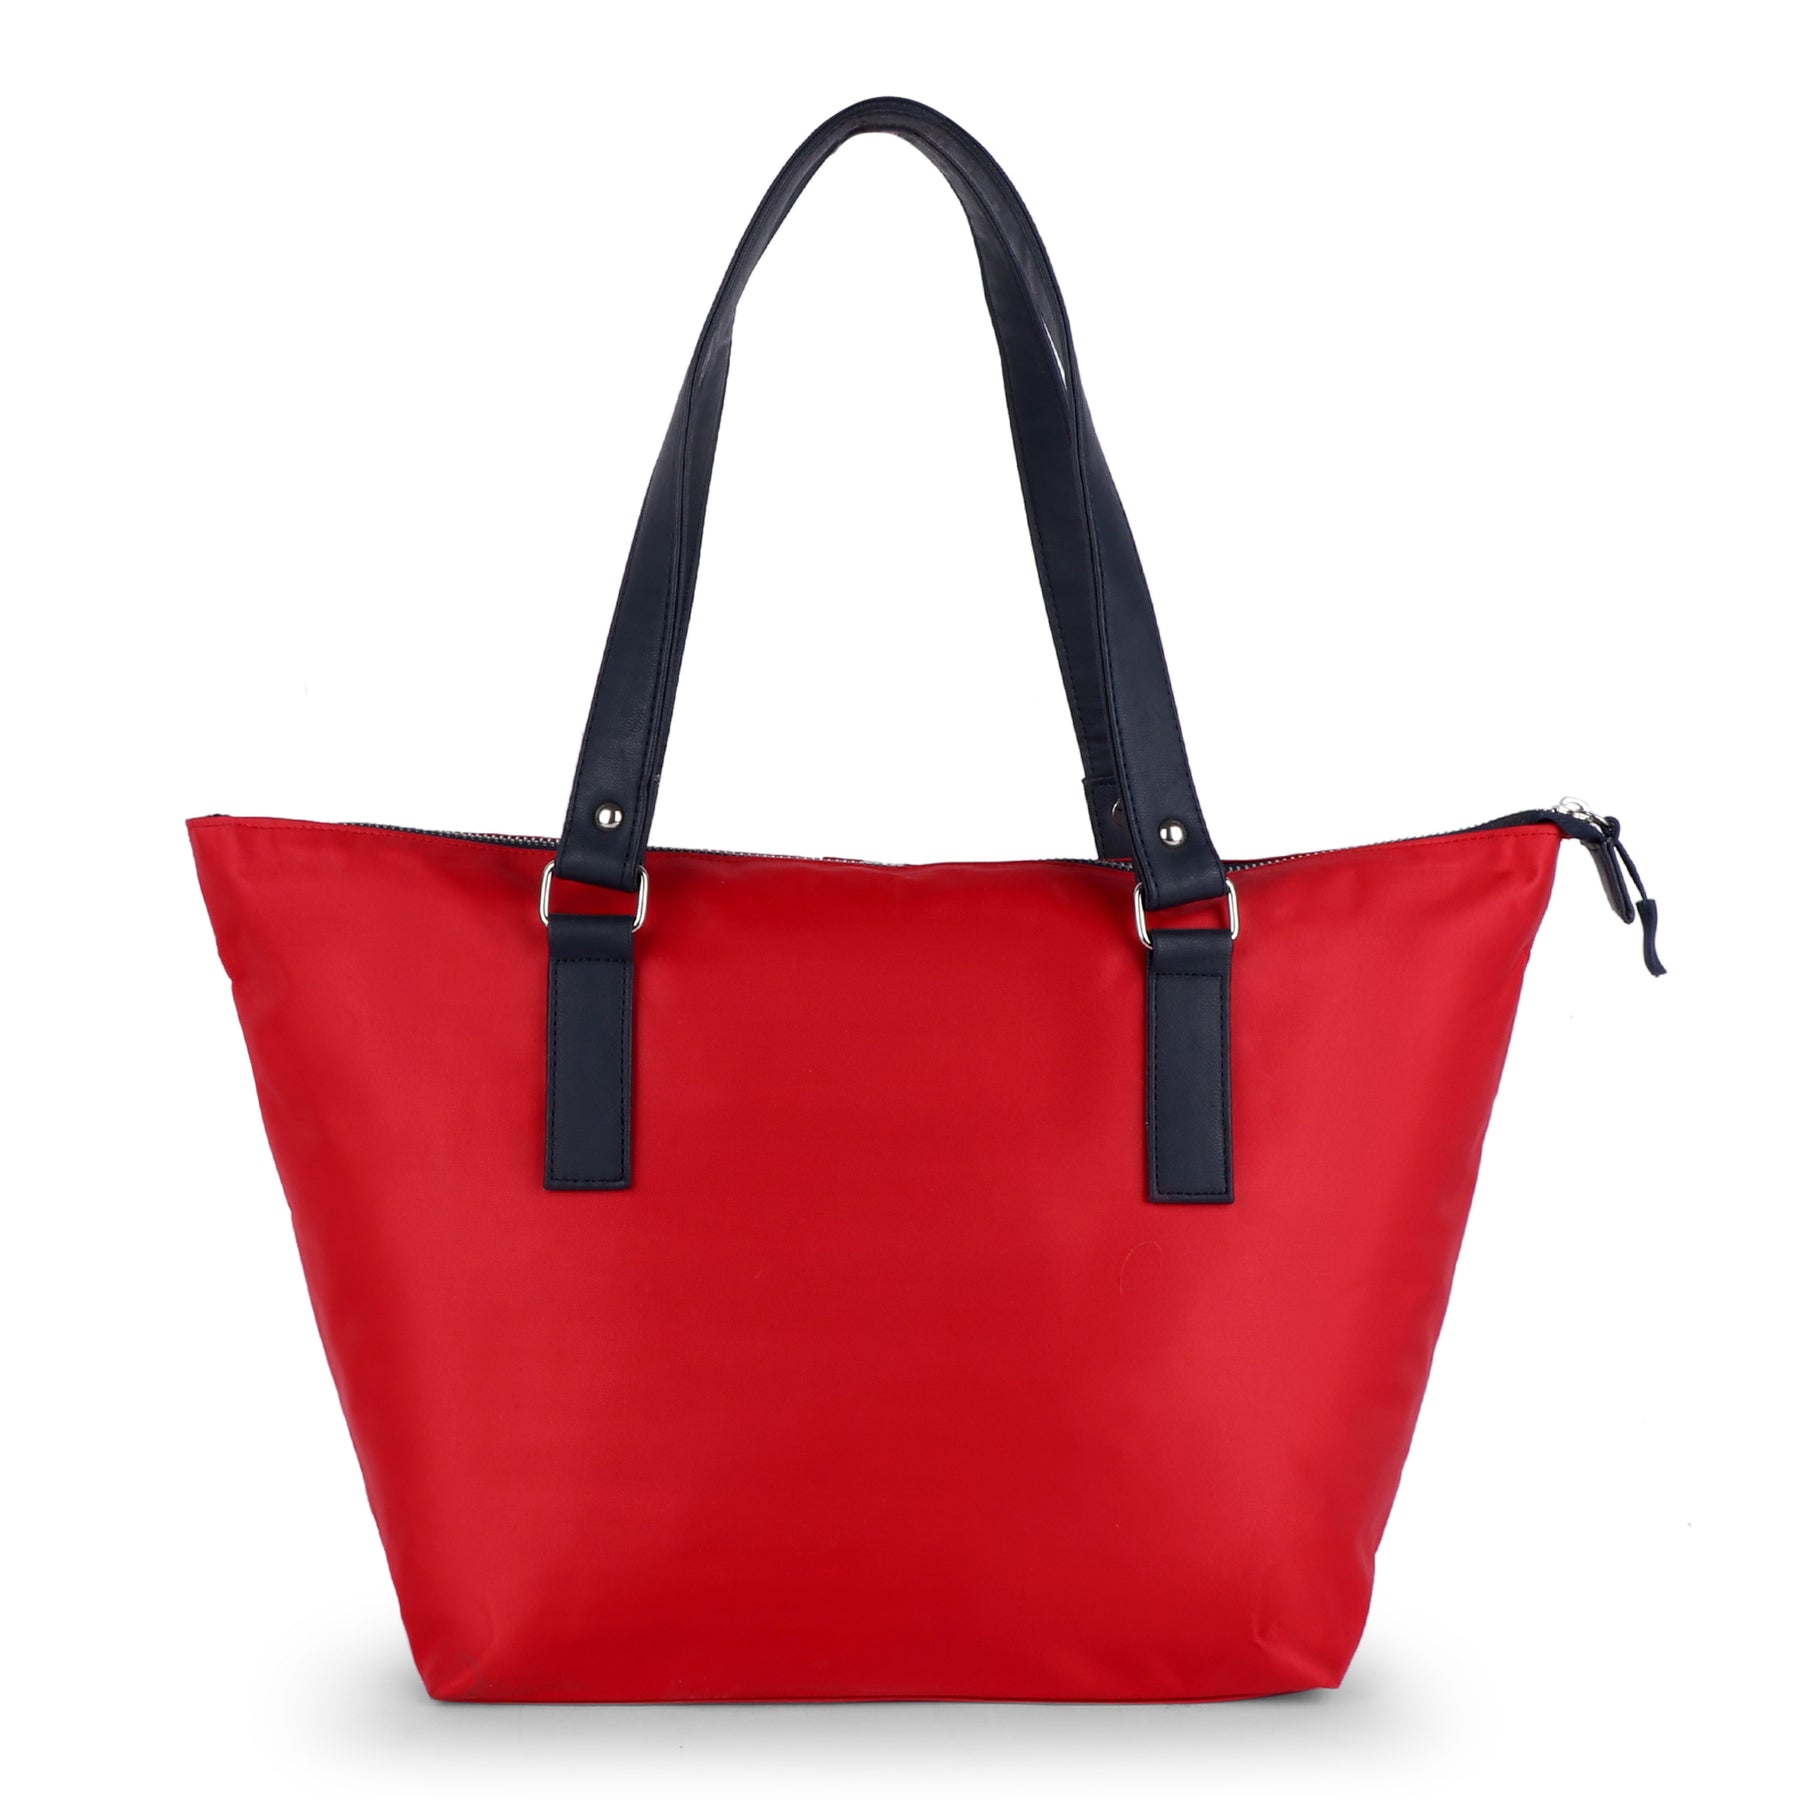 AMSWAN UNISEX RED TOTE BAG